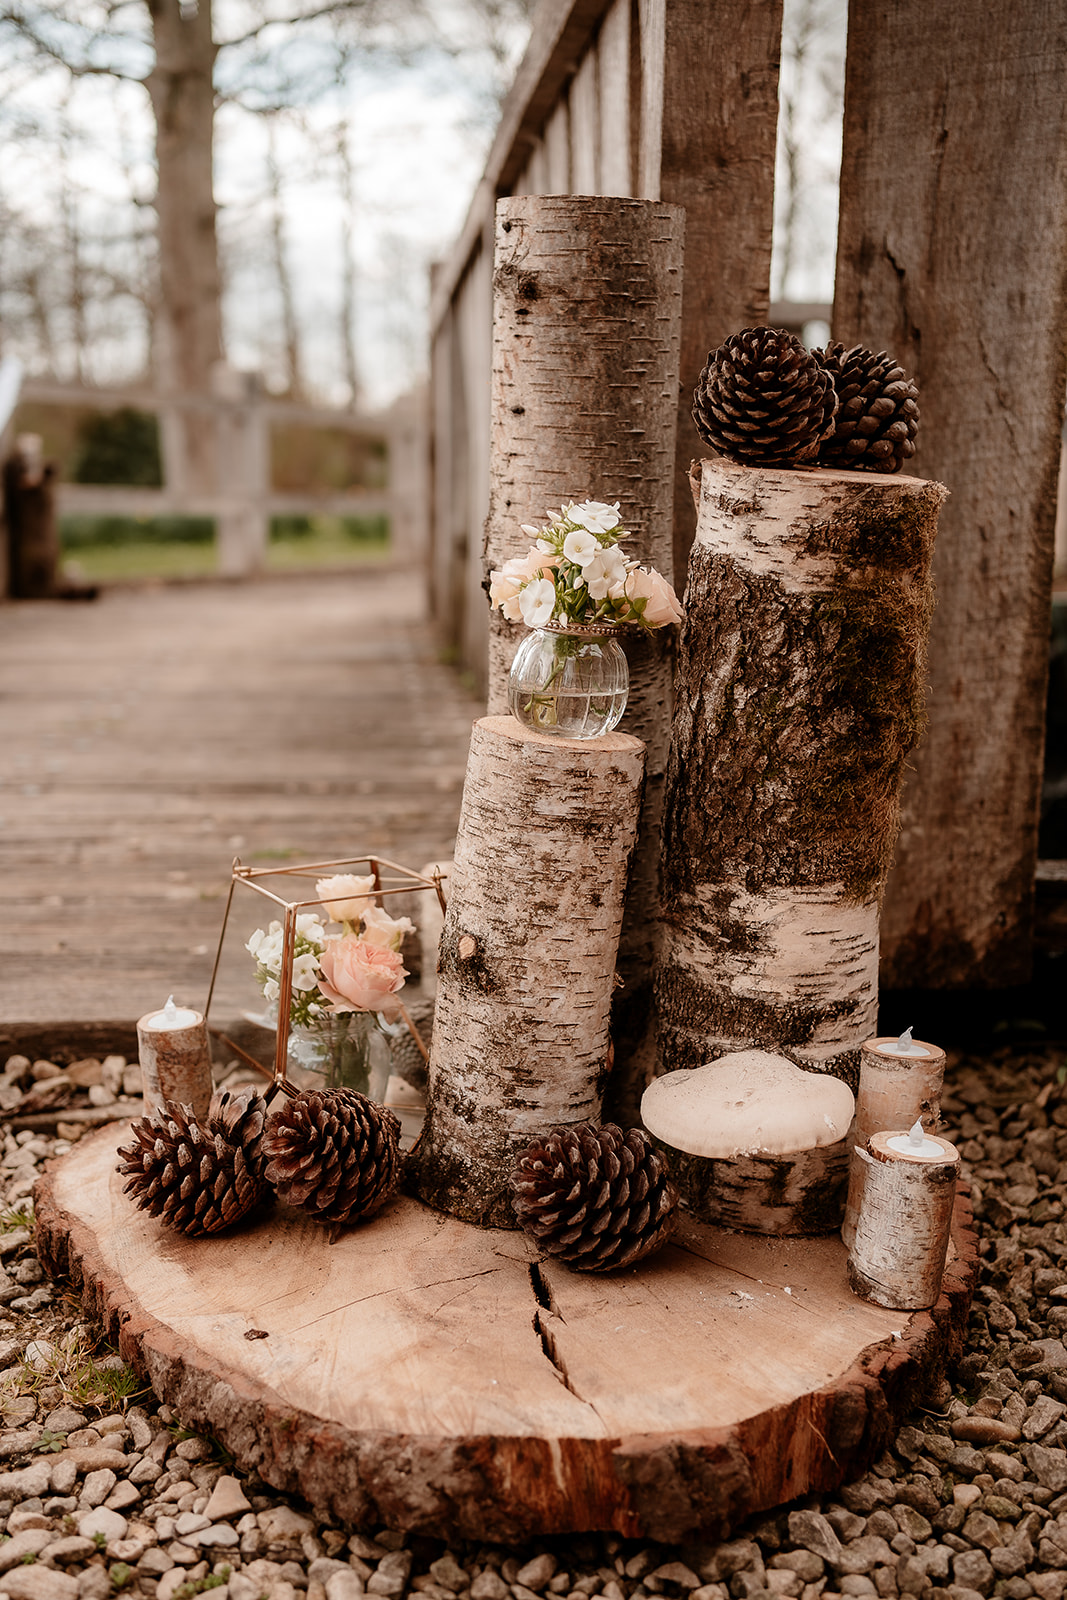 Birchwood and peach flower styling on the bridge with tealight candles